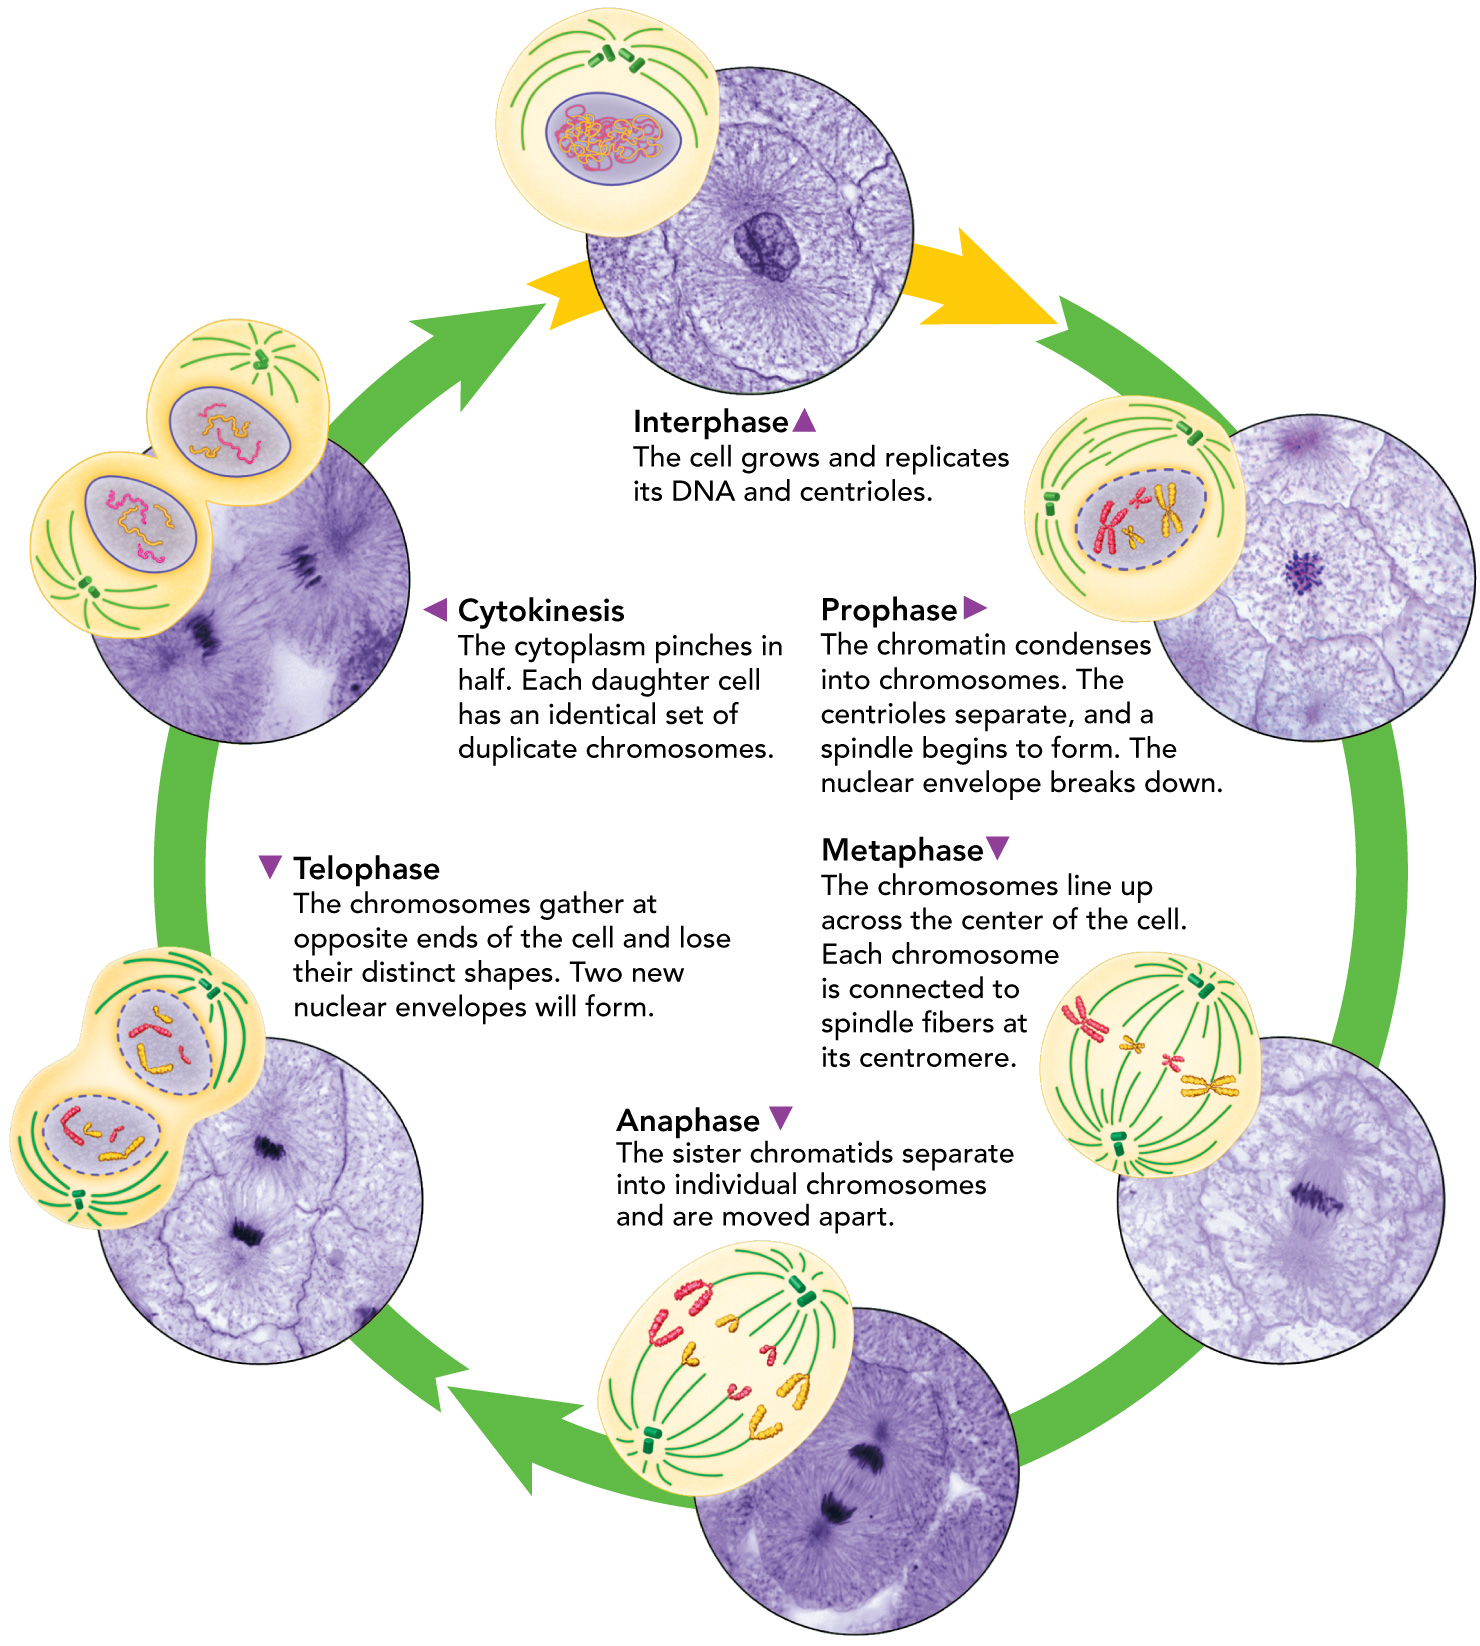 A diagram showing the phases of the mitosis cycle: interphase, prophase, metaphase, anaphase, telophase, cytokinesis, and back to interphase.